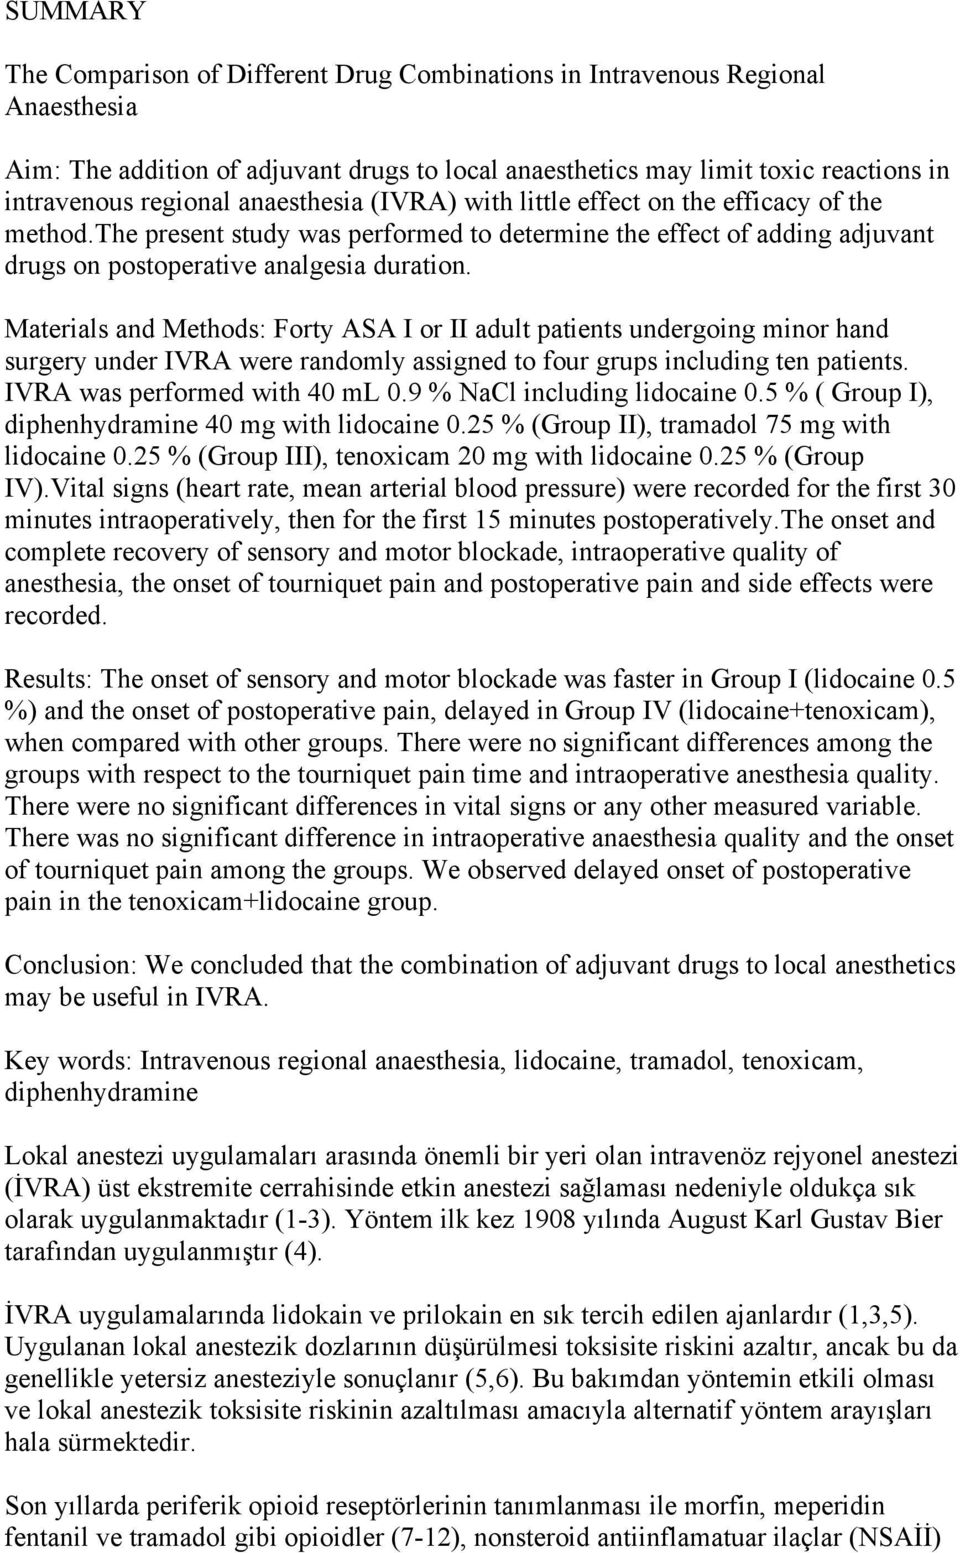 Materials and Methods: Forty ASA I or II adult patients undergoing minor hand surgery under IVRA were randomly assigned to four grups including ten patients. IVRA was performed with 40 ml 0.